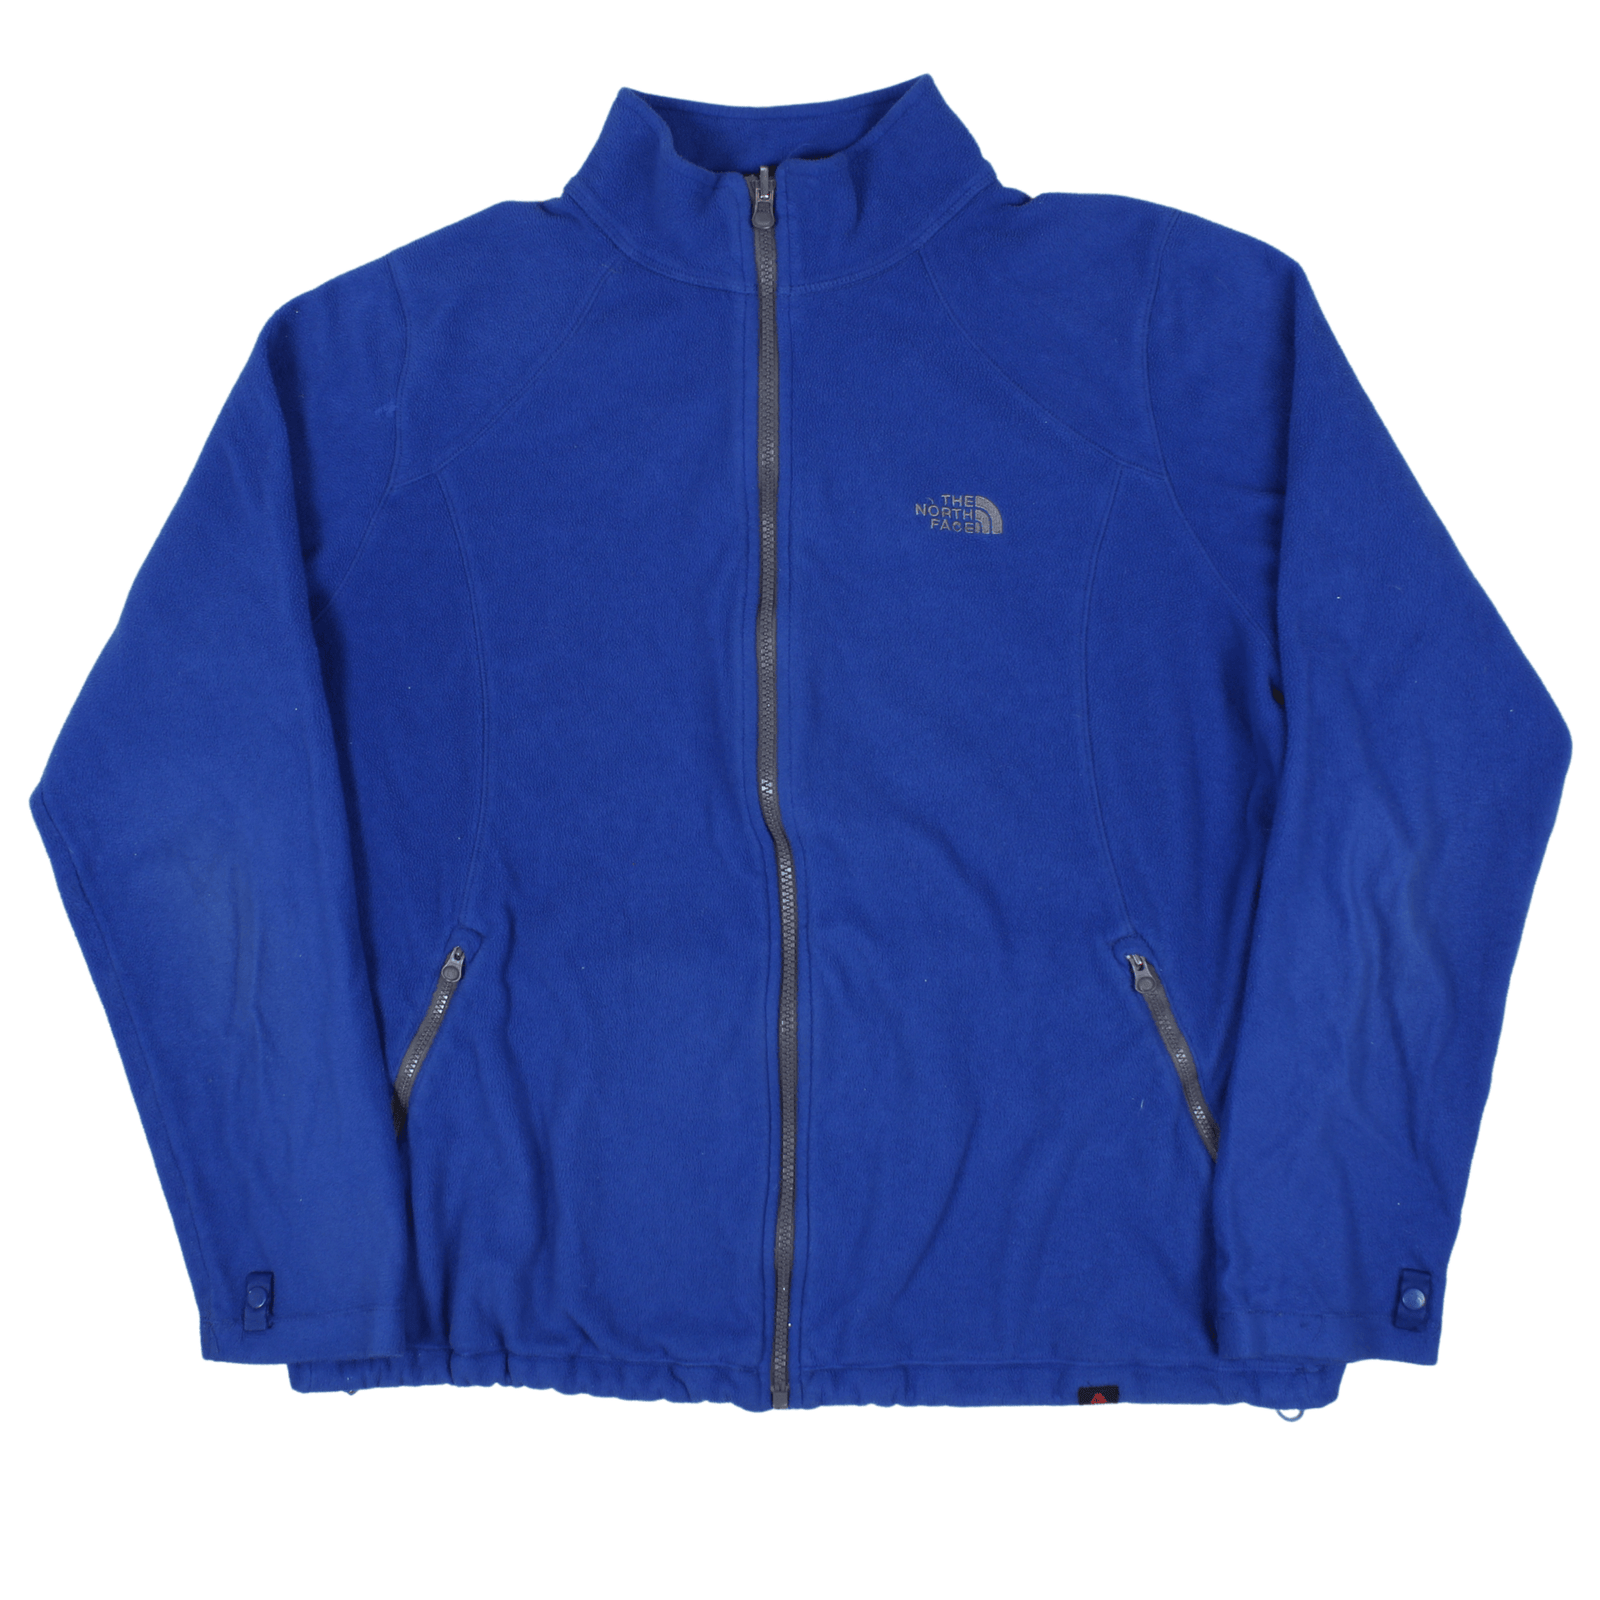 Vintage The North Face Zipped Fleece (M)